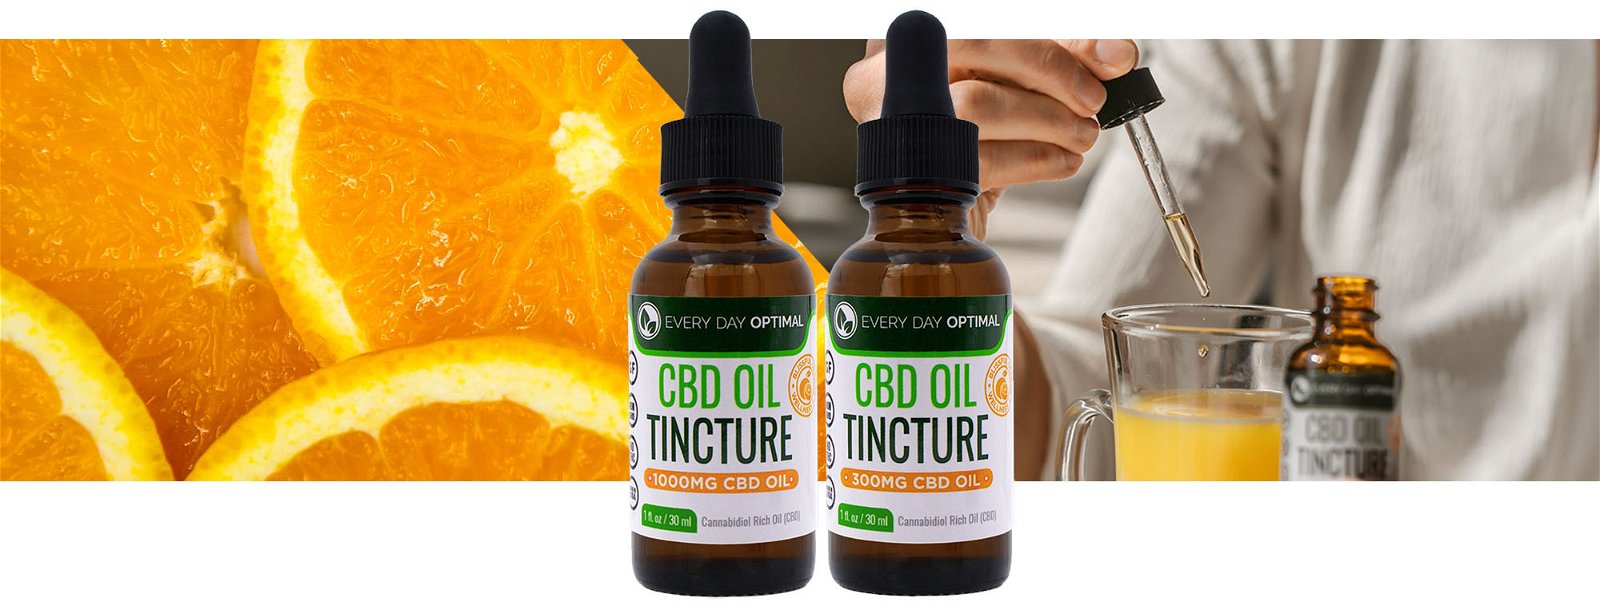 A bottle of CBD gummies, D-Stress capsules, and CBD tincture are sitting in front of a photo of a father and son